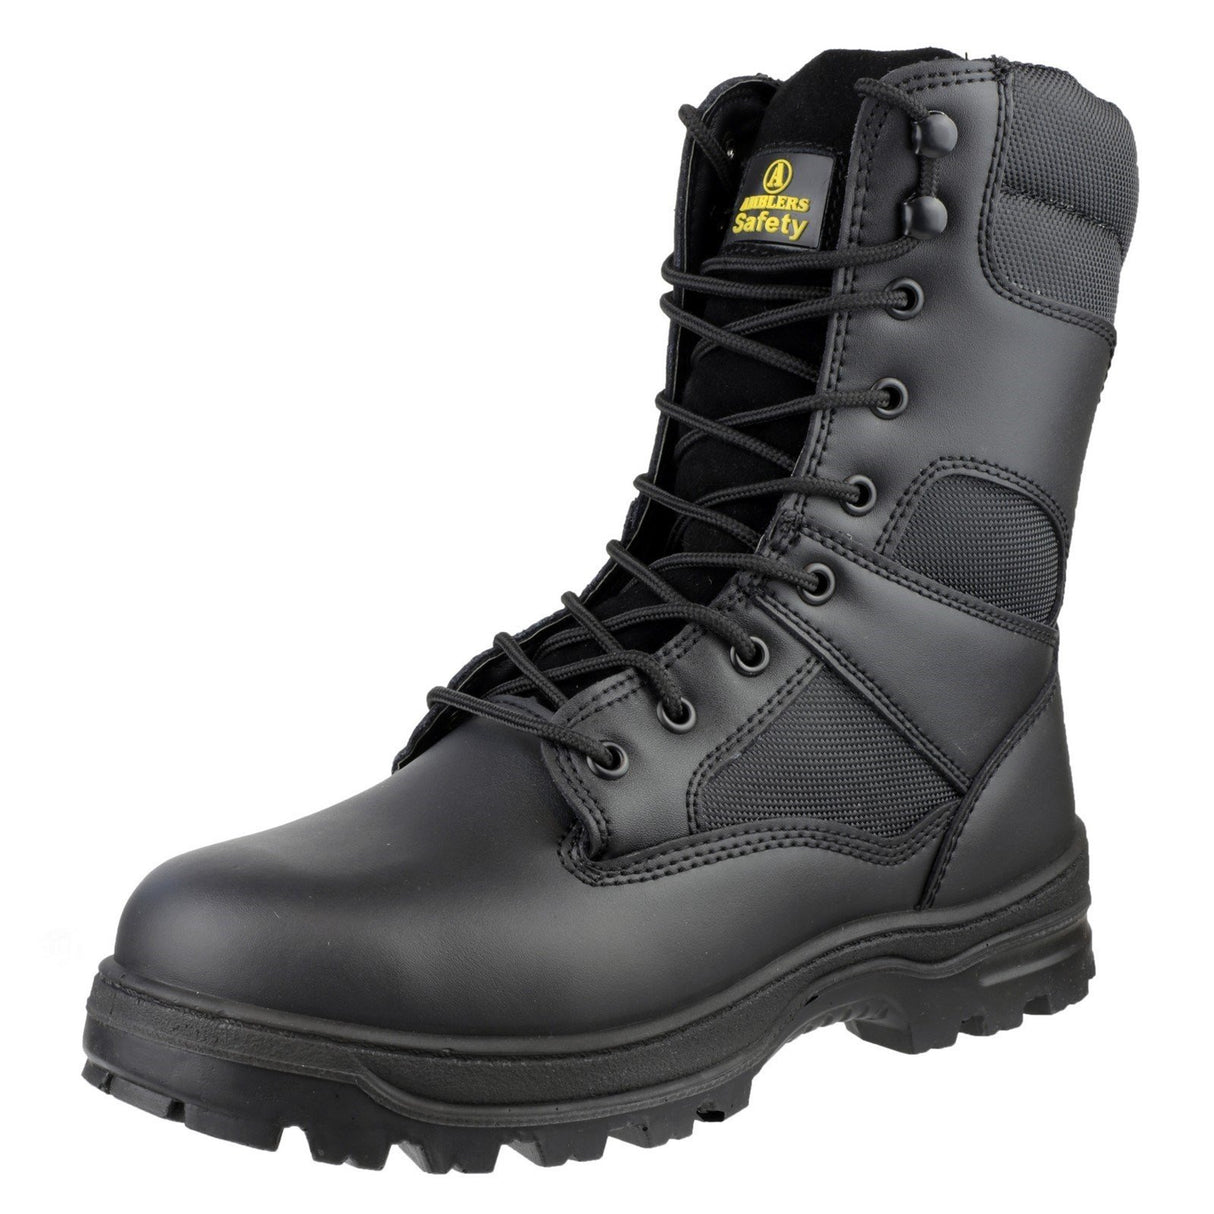 Amblers Safety Water Resistant Steel Toe Cap Hi Leg Lace Up Safety Boots